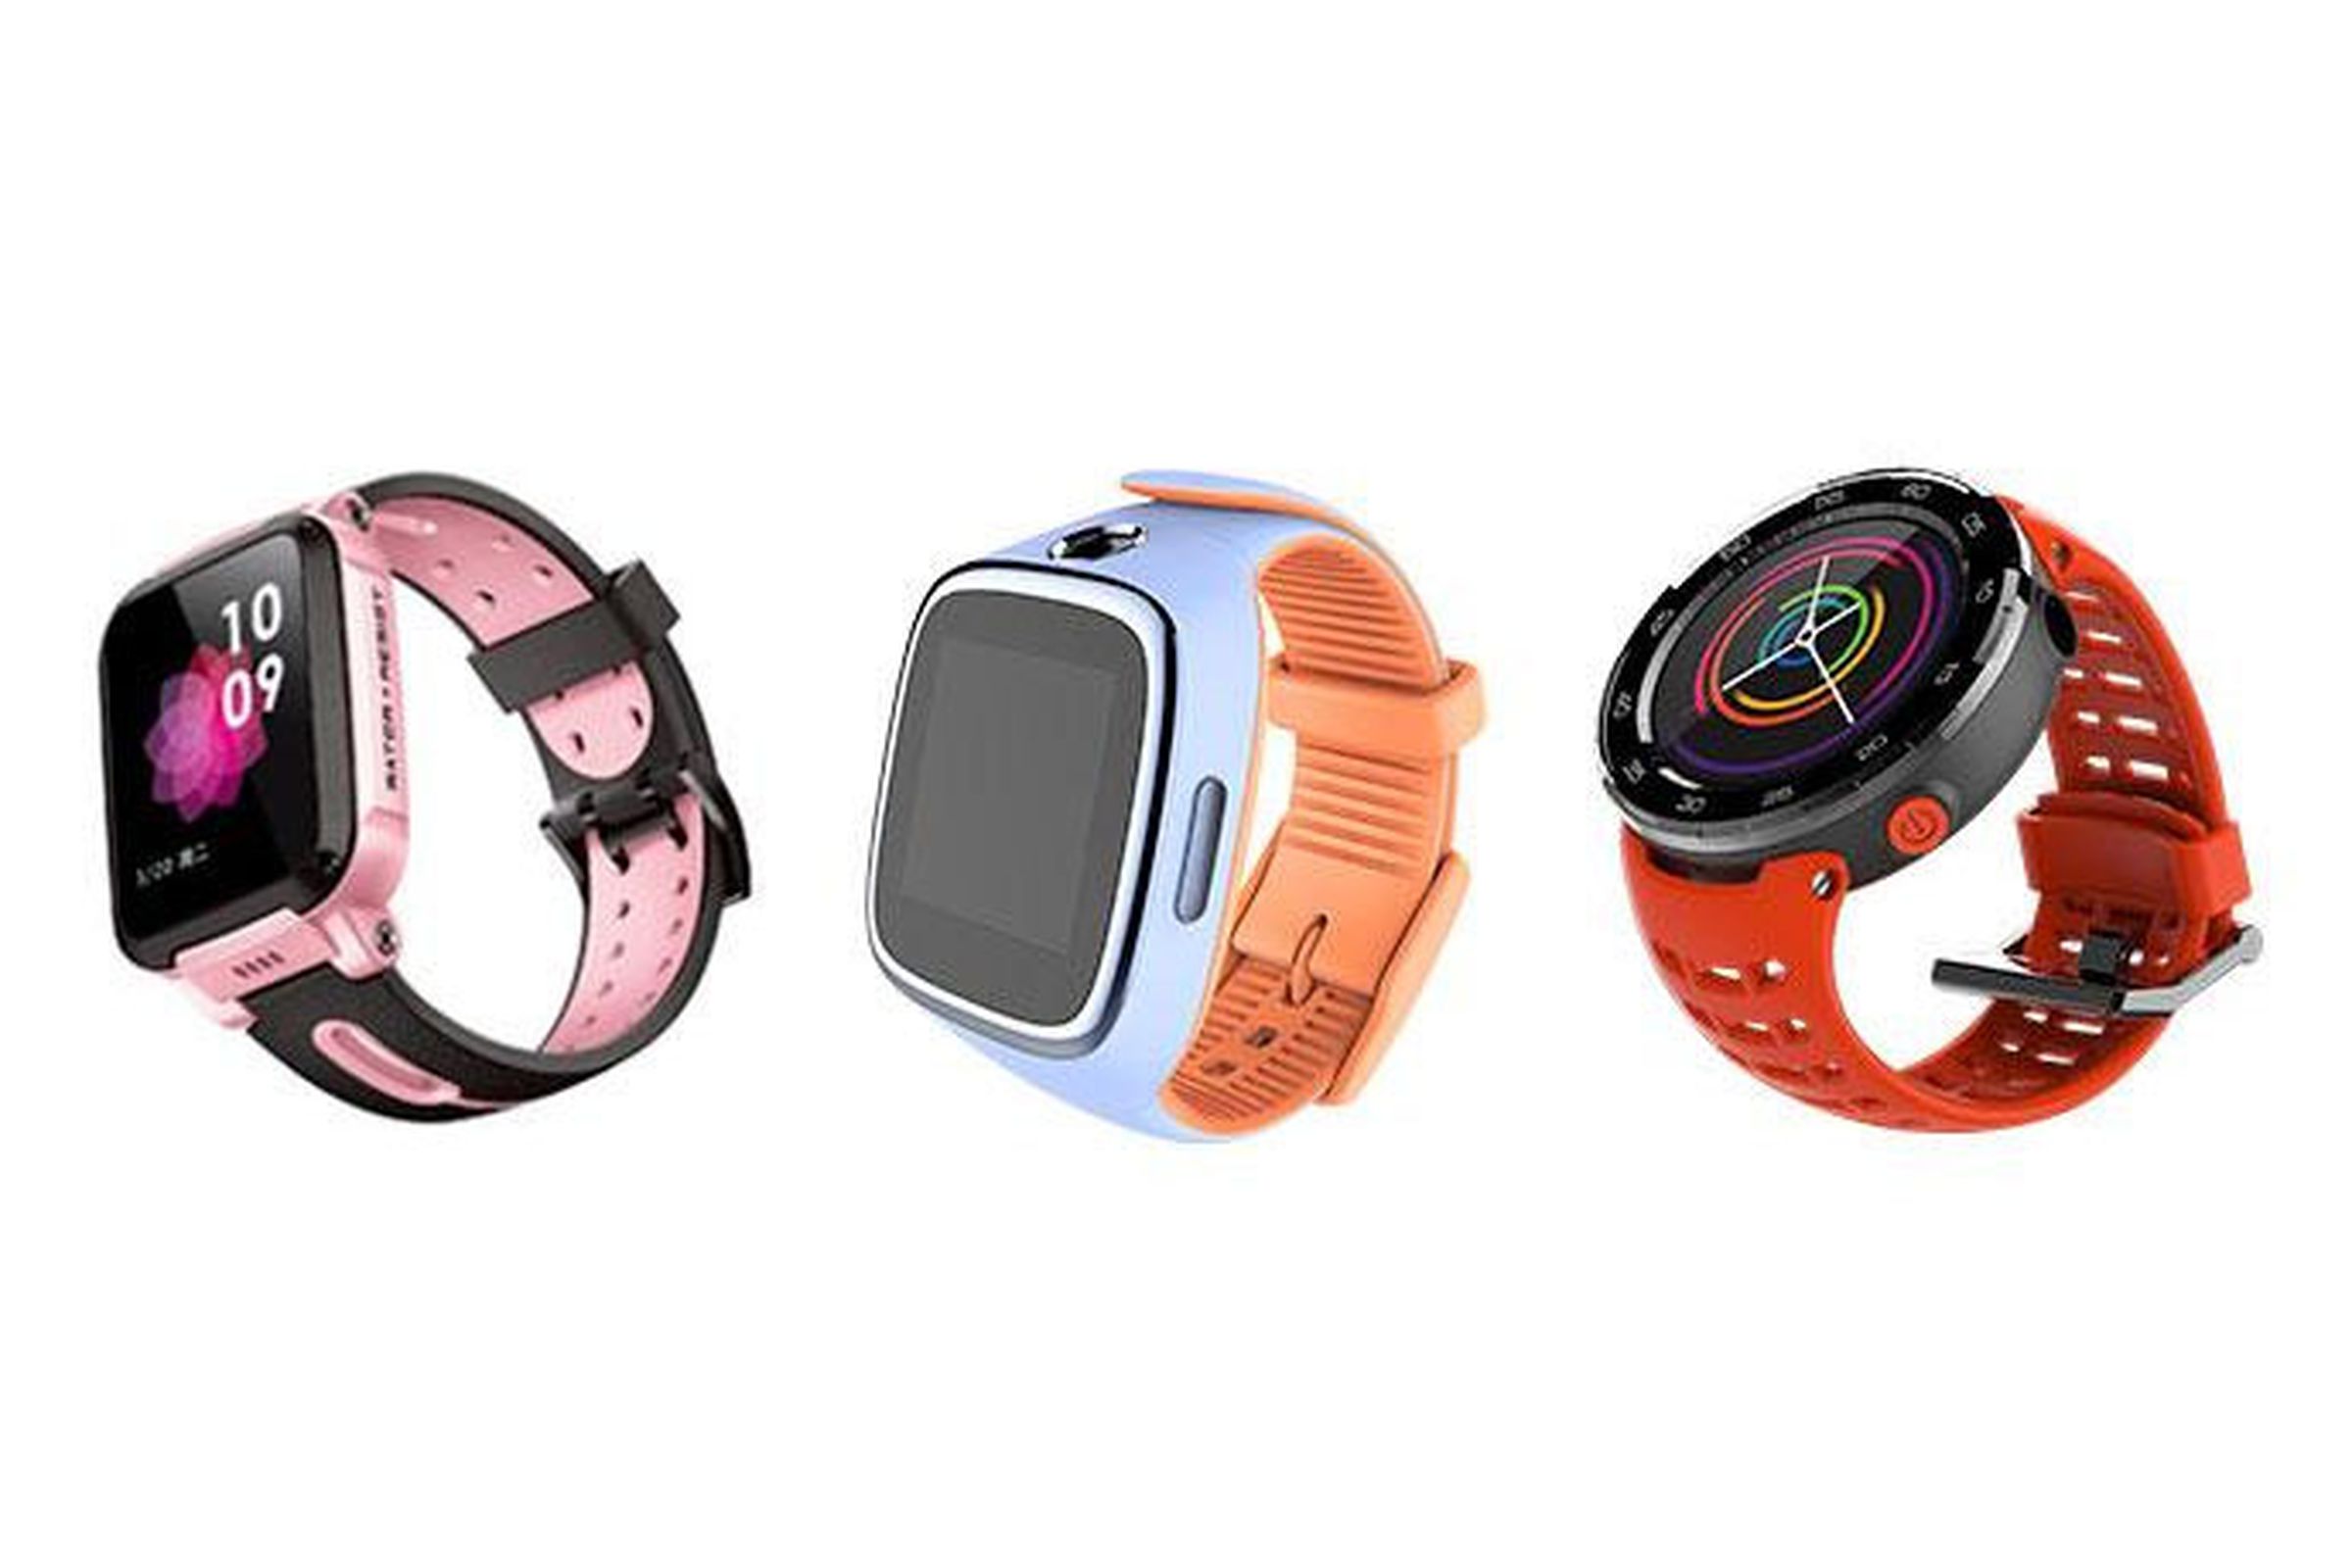 Kids’ watches using earlier Qualcomm chips.